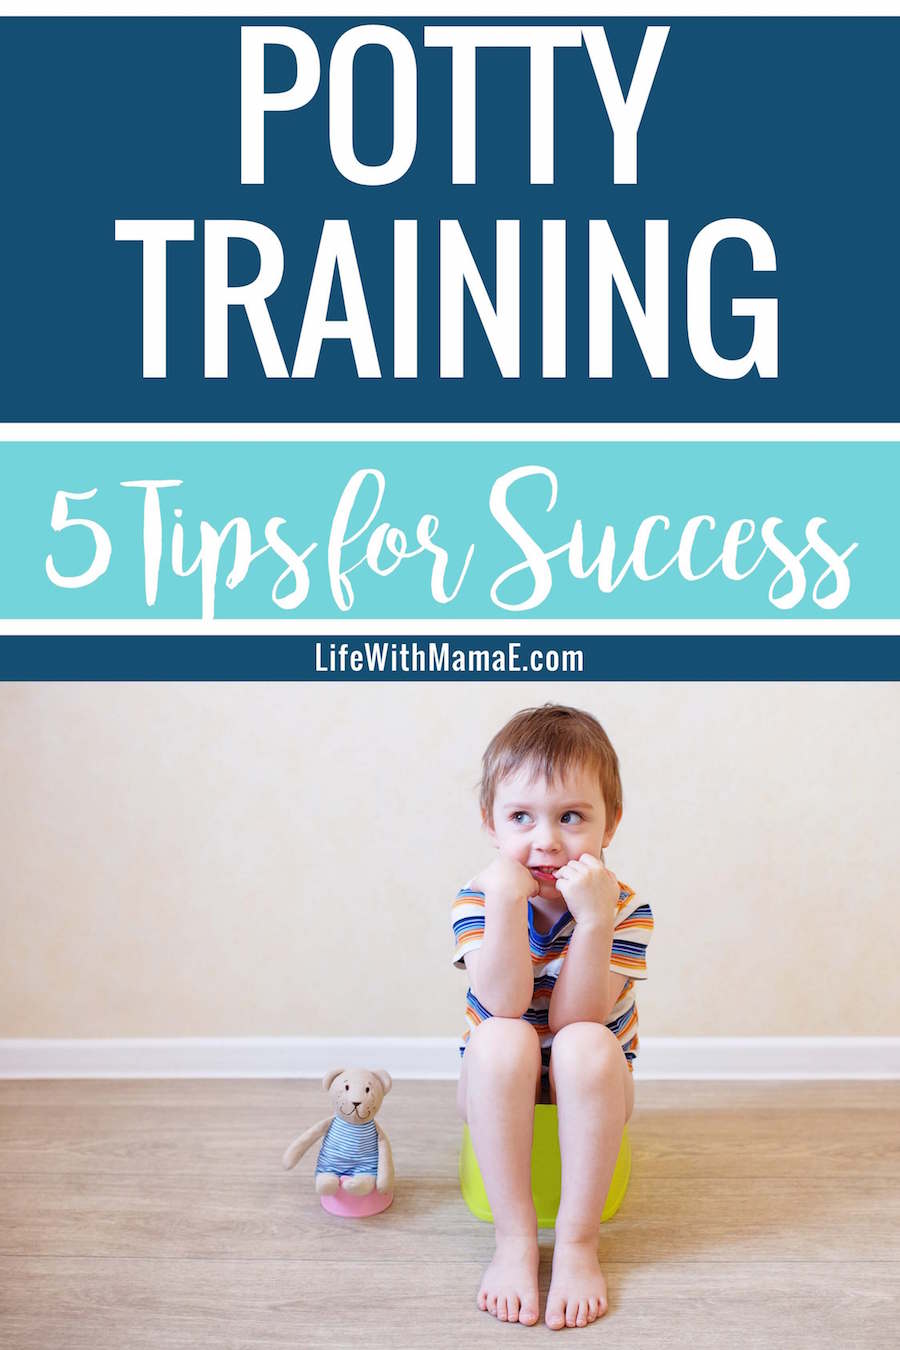 Potty training boys and girls takes a lot of humor and a lot of rewards. These tips for potty training success will have your toddler potty trained quickly!